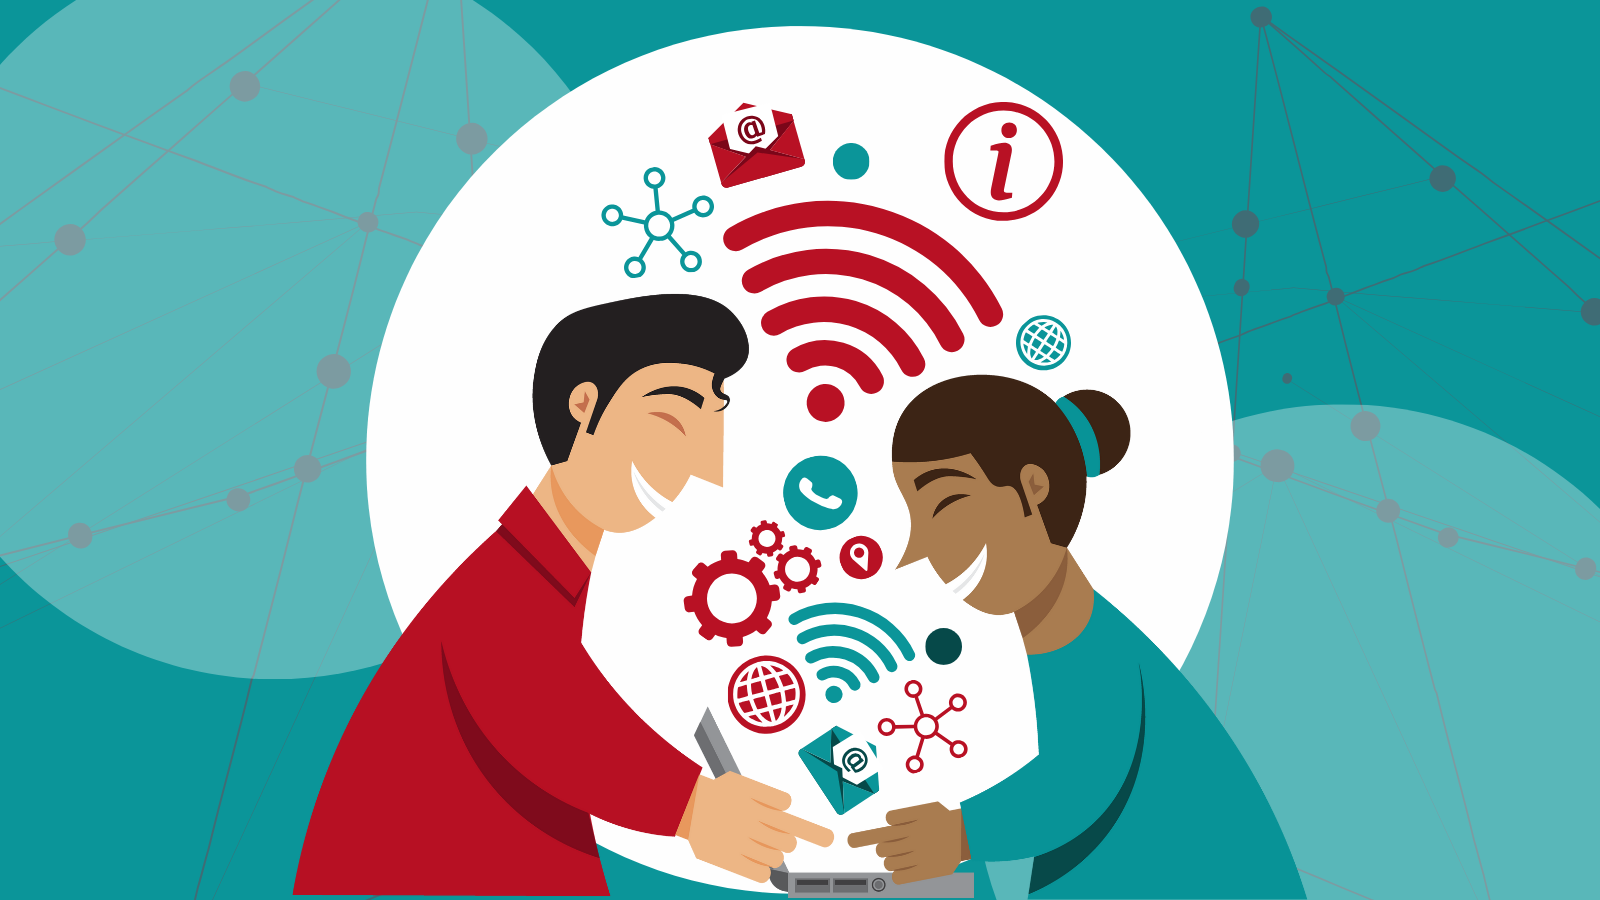 Graphic illustration with two figures facing each other and symbols of wifi, information, world wide web, email, networking